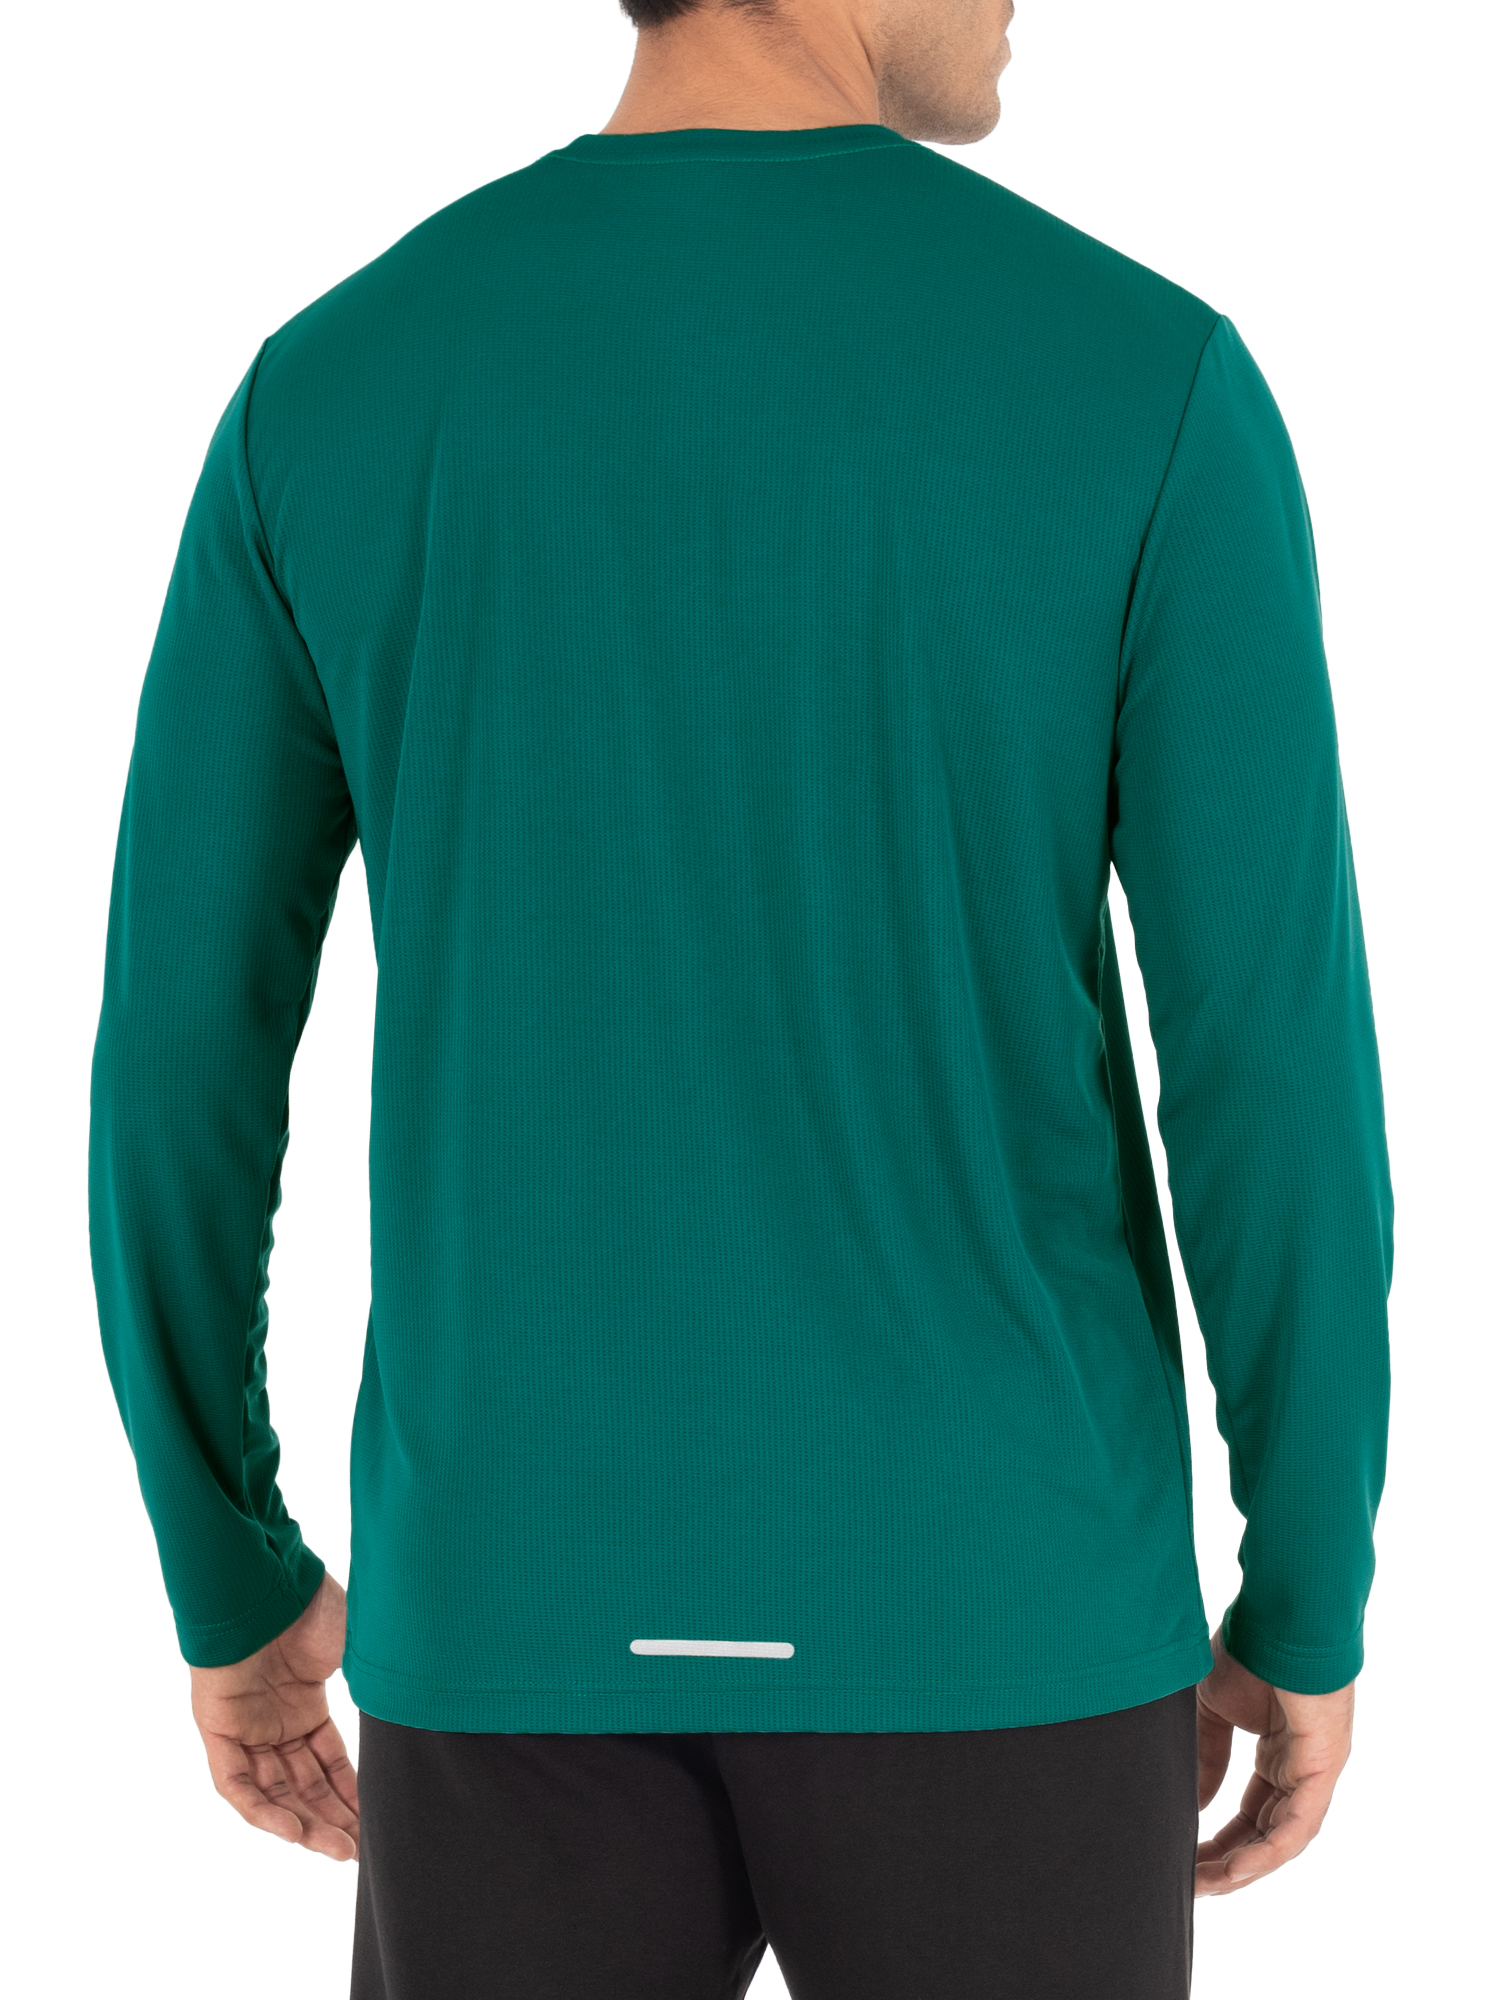 Athletic Works Men's and Big Men's Active Quick Dry Performance Long Sleeve T-Shirt, up to Size 5XL - image 4 of 7